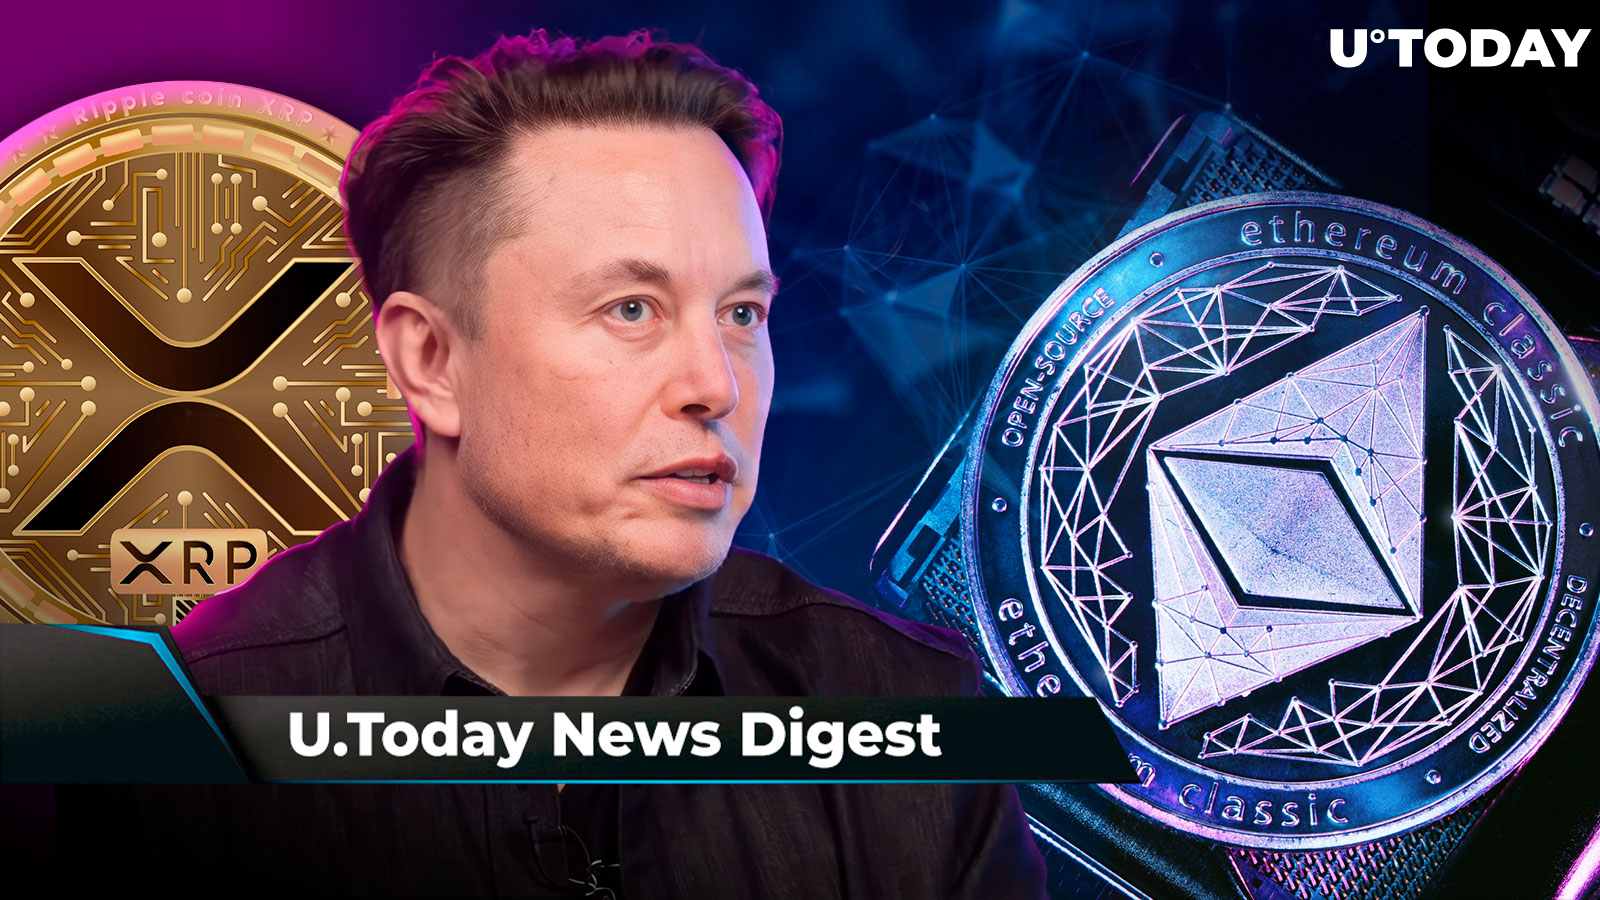 Elon Musk Provokes XRP Army's Heated Reaction With His New Post, Pro-XRP Lawyer Teases 'Big Announcement,' Vitalik Buterin Moves Half Million in ETH: Crypto News Digest by U.Today